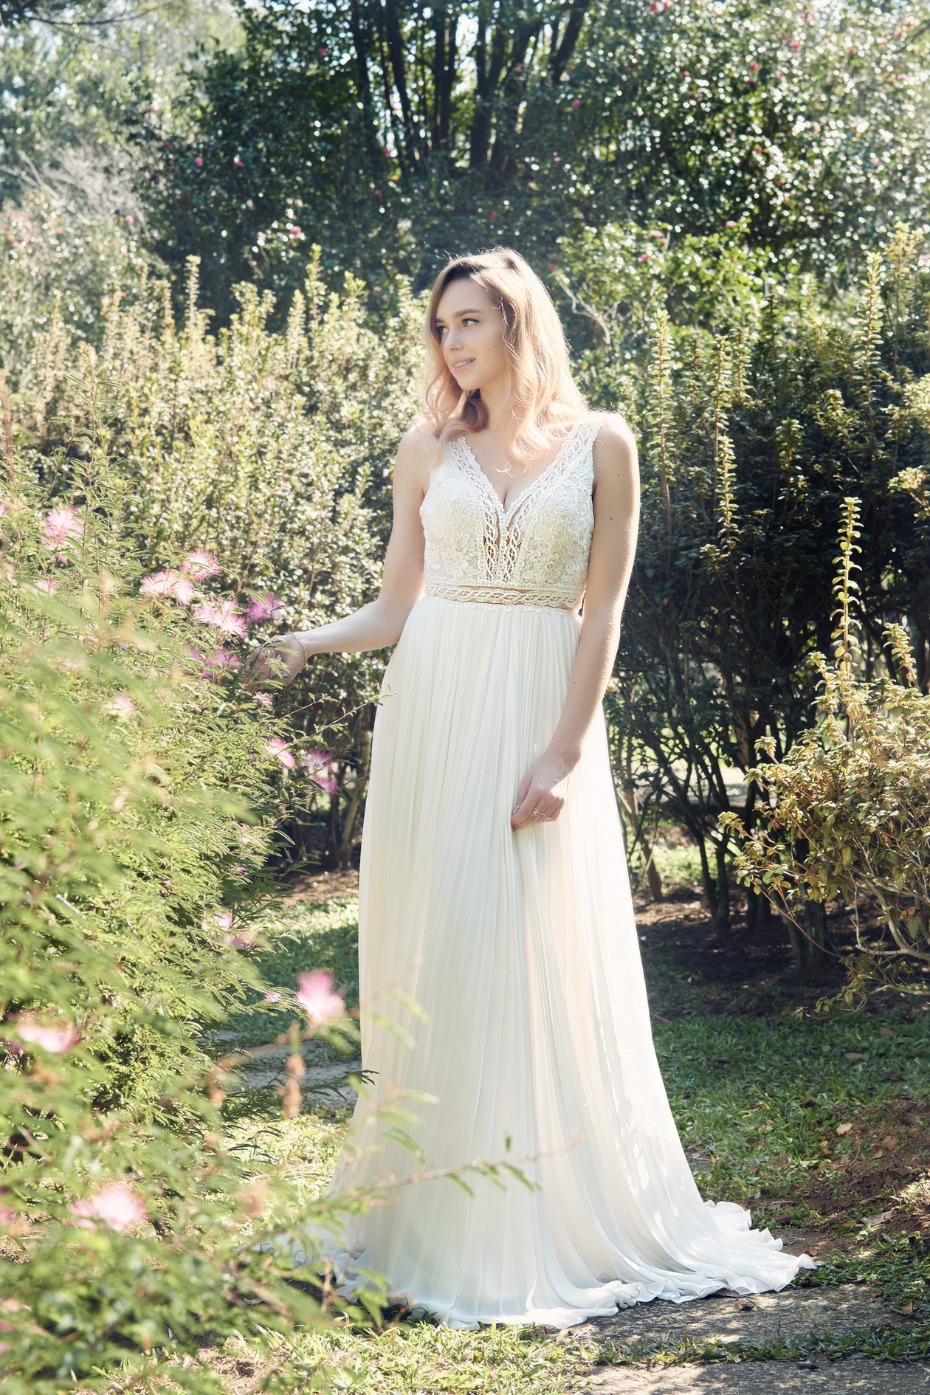 This Brand Will Turn a Made to Order Wedding Dress Around in 6 Weeks or Less